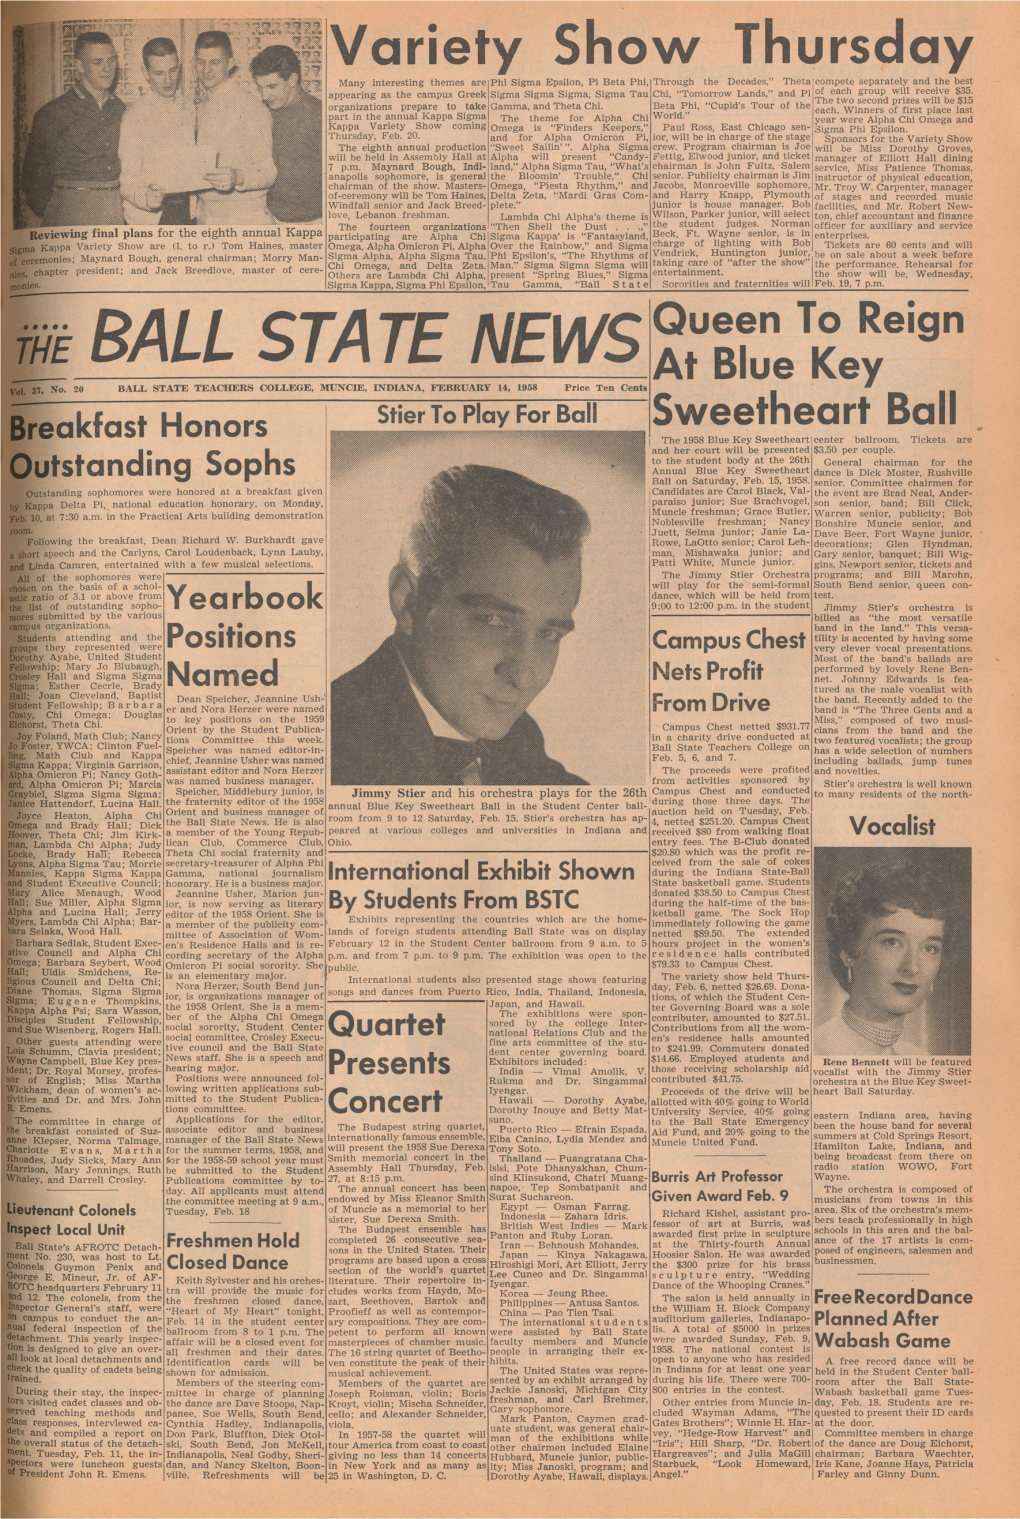 THE BALL STATE NEWS at Blue Key Vol